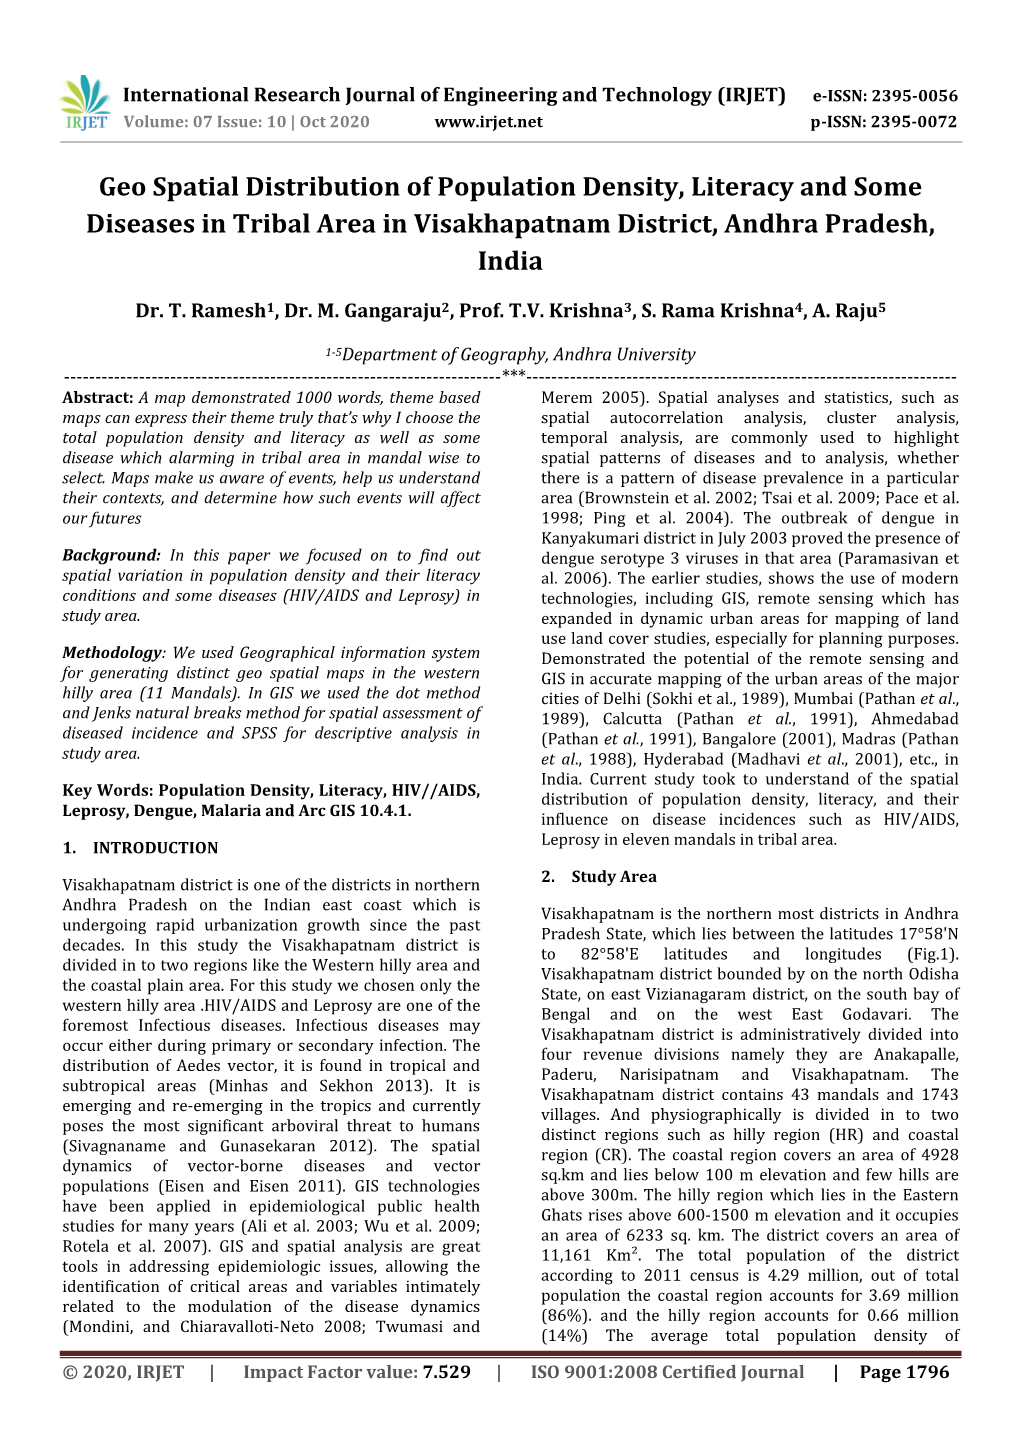 Geo Spatial Distribution of Population Density, Literacy and Some Diseases in Tribal Area in Visakhapatnam District, Andhra Pradesh, India